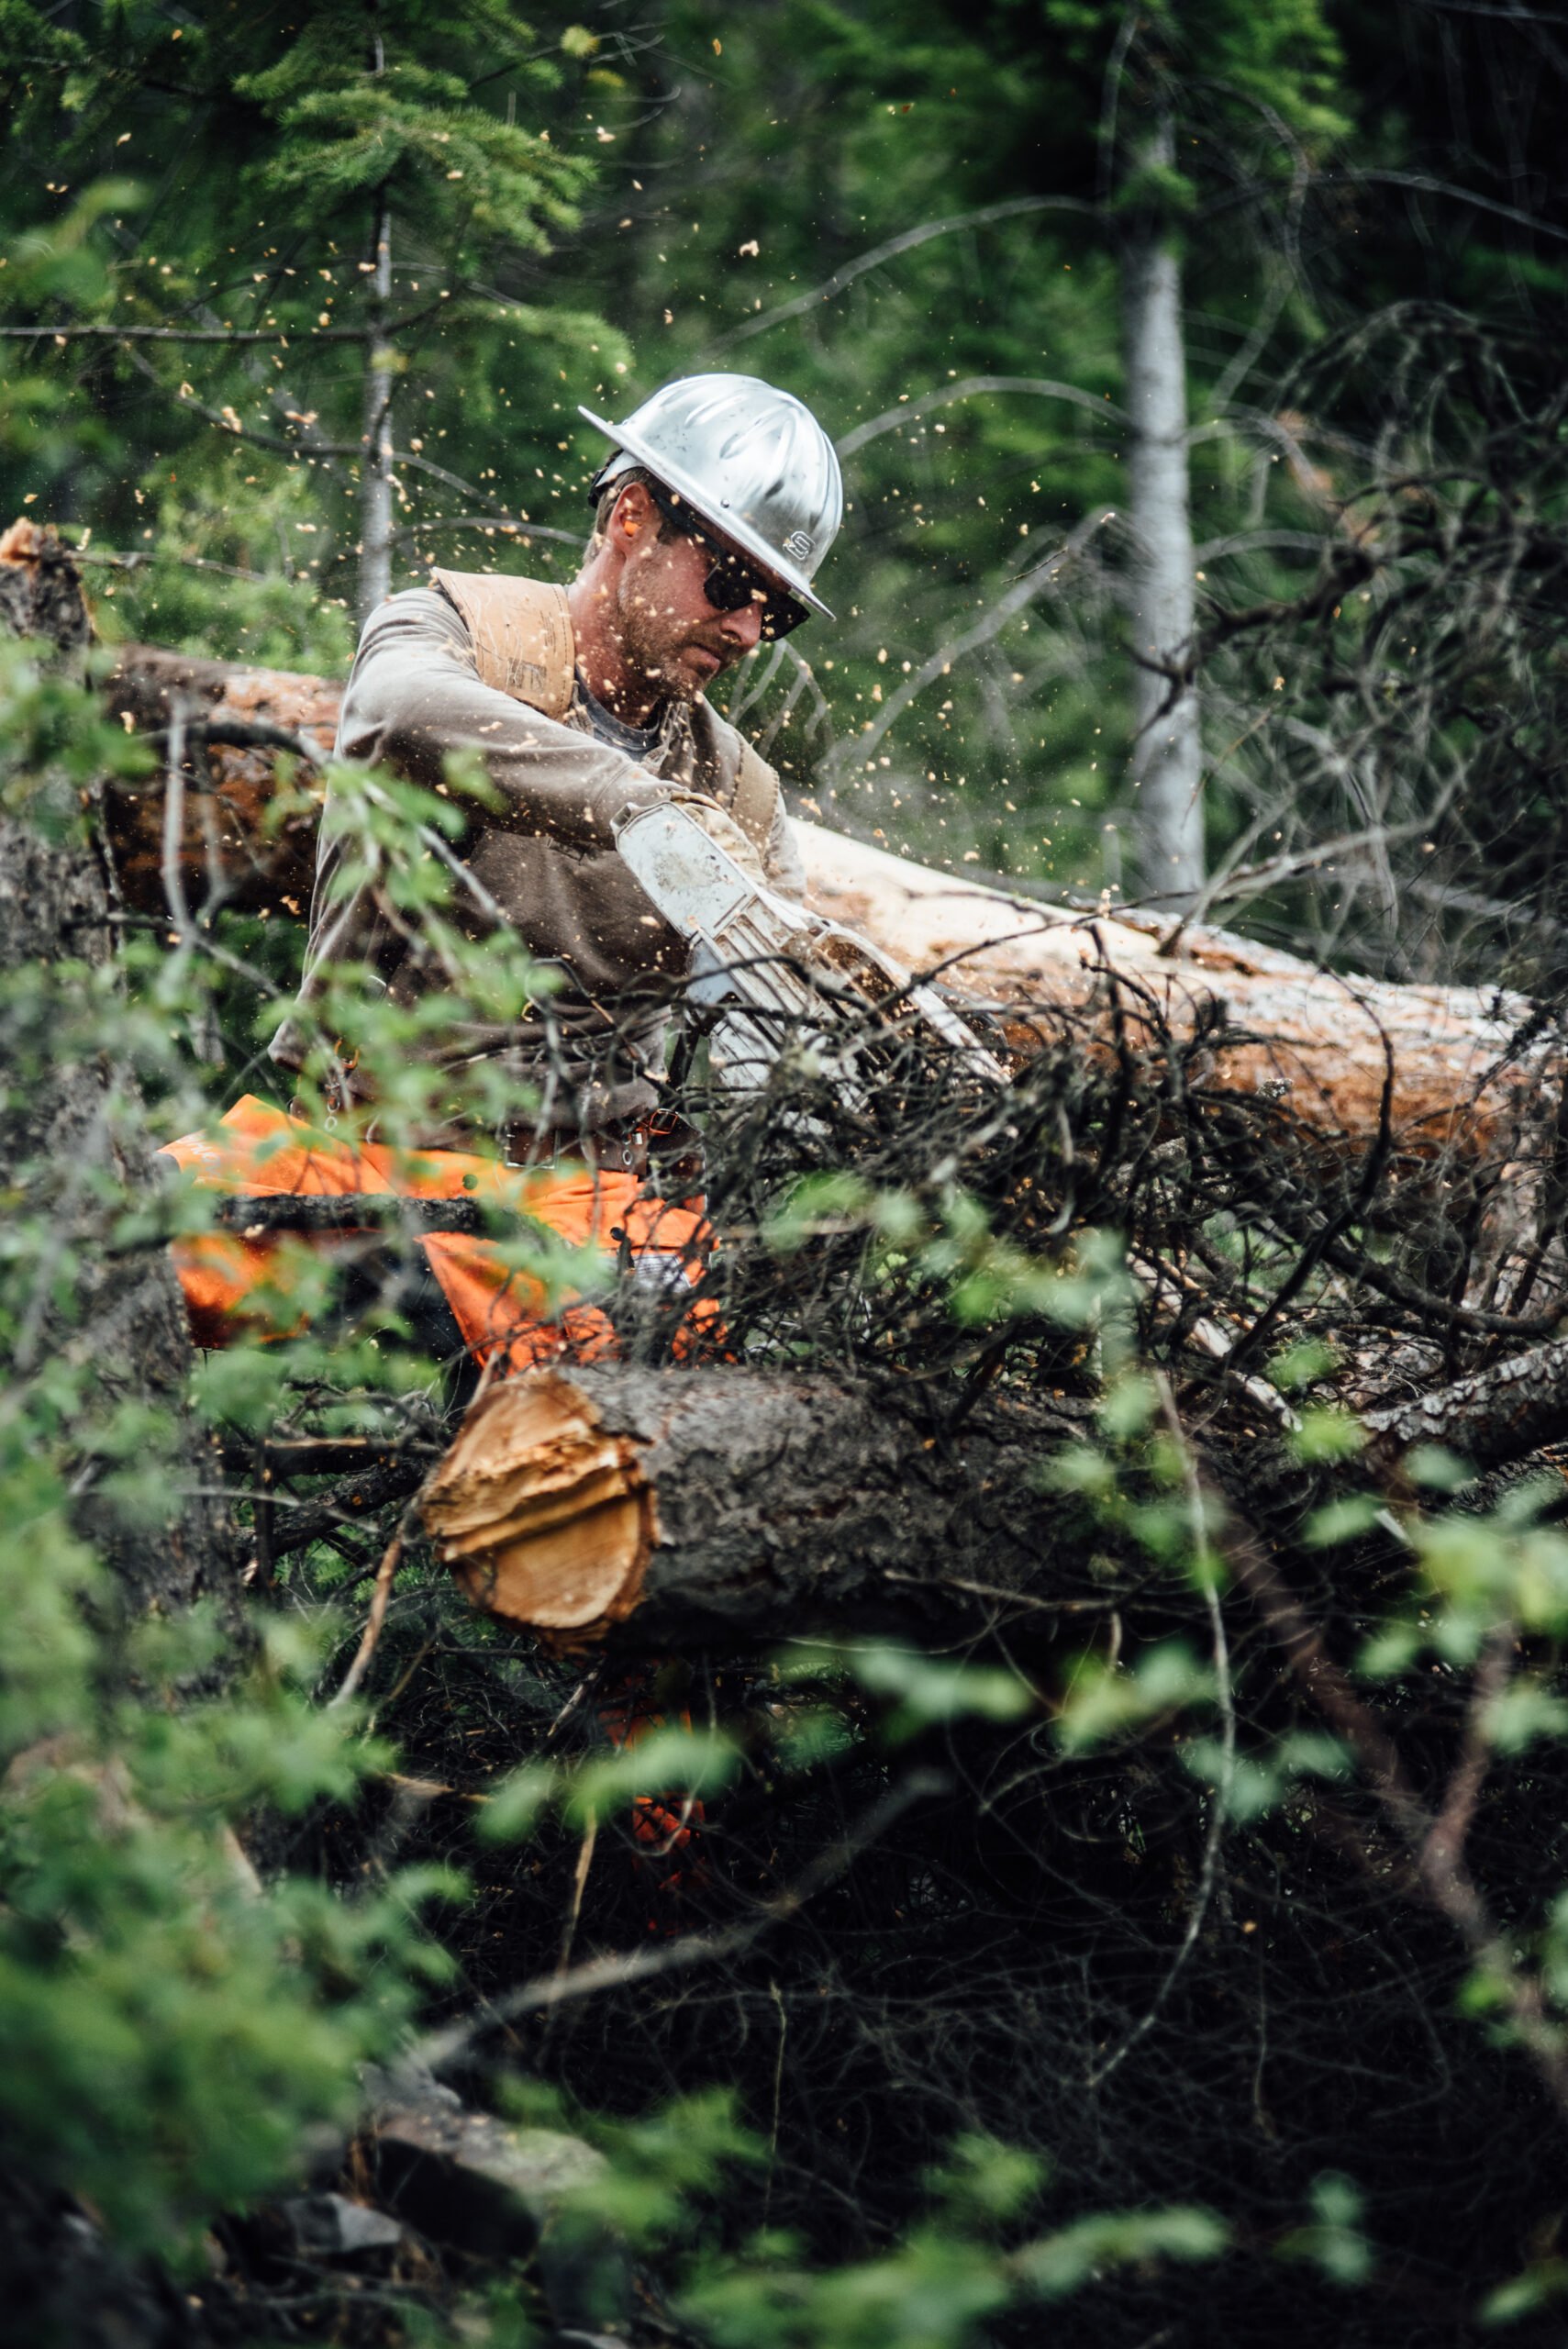 Isaac Miller photographs a logging operation at a bison ranch in Montana.